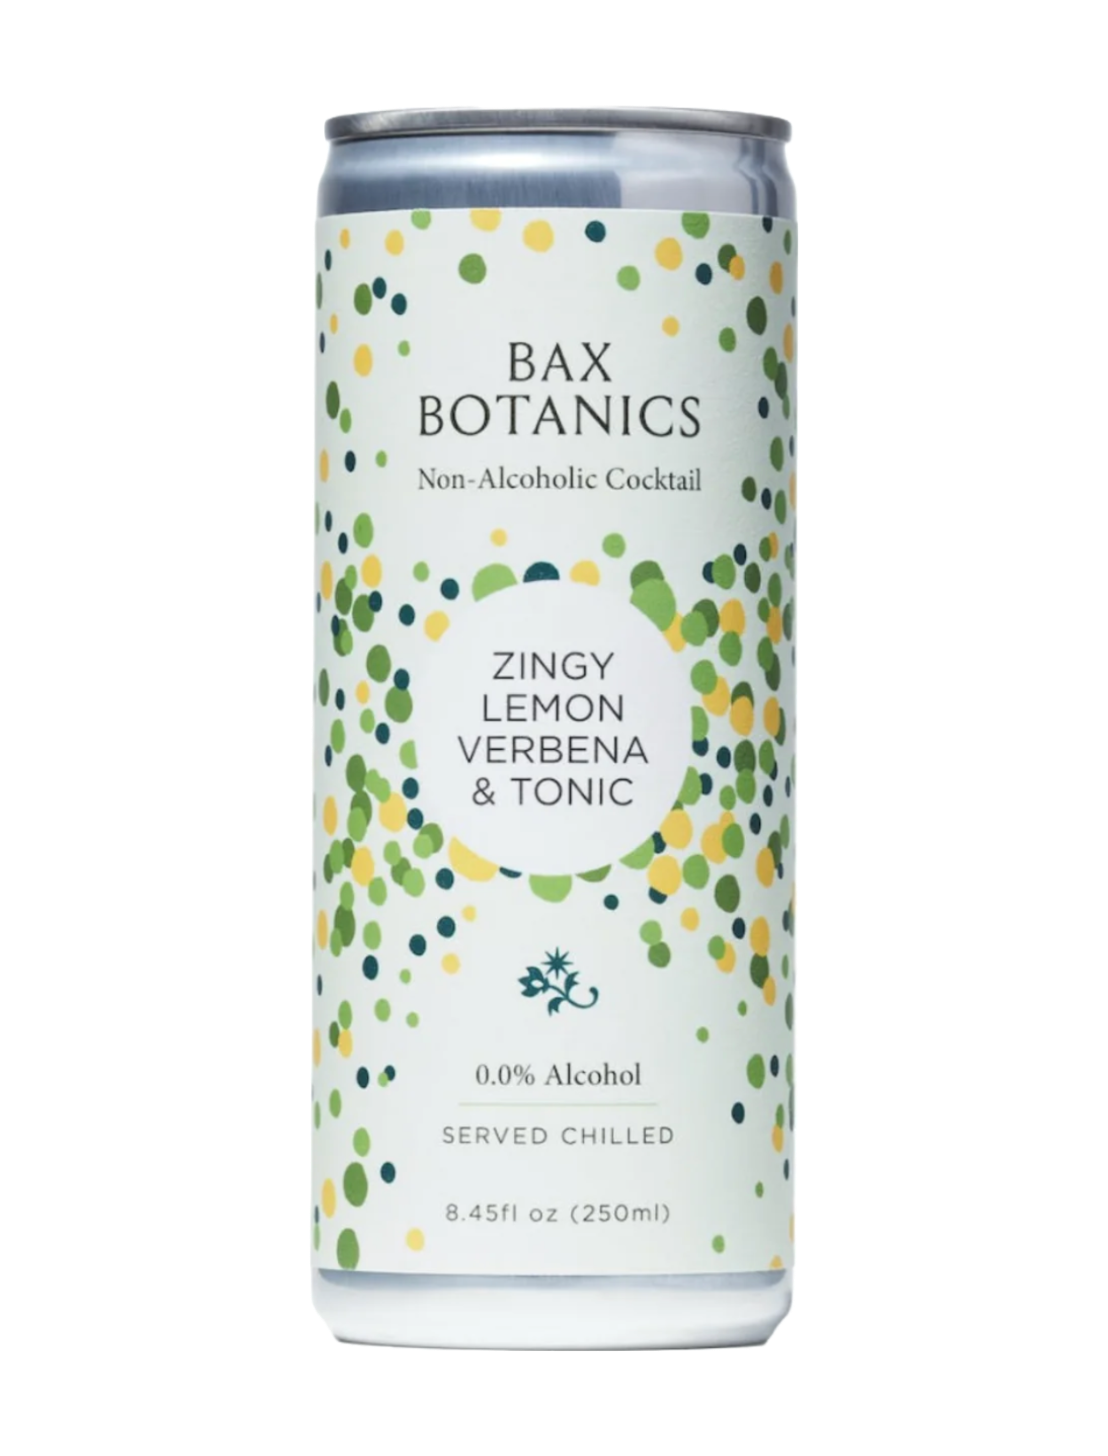 A can of Bax Botanics Zingy Lemon Verbena & Tonic in front of a plain white background